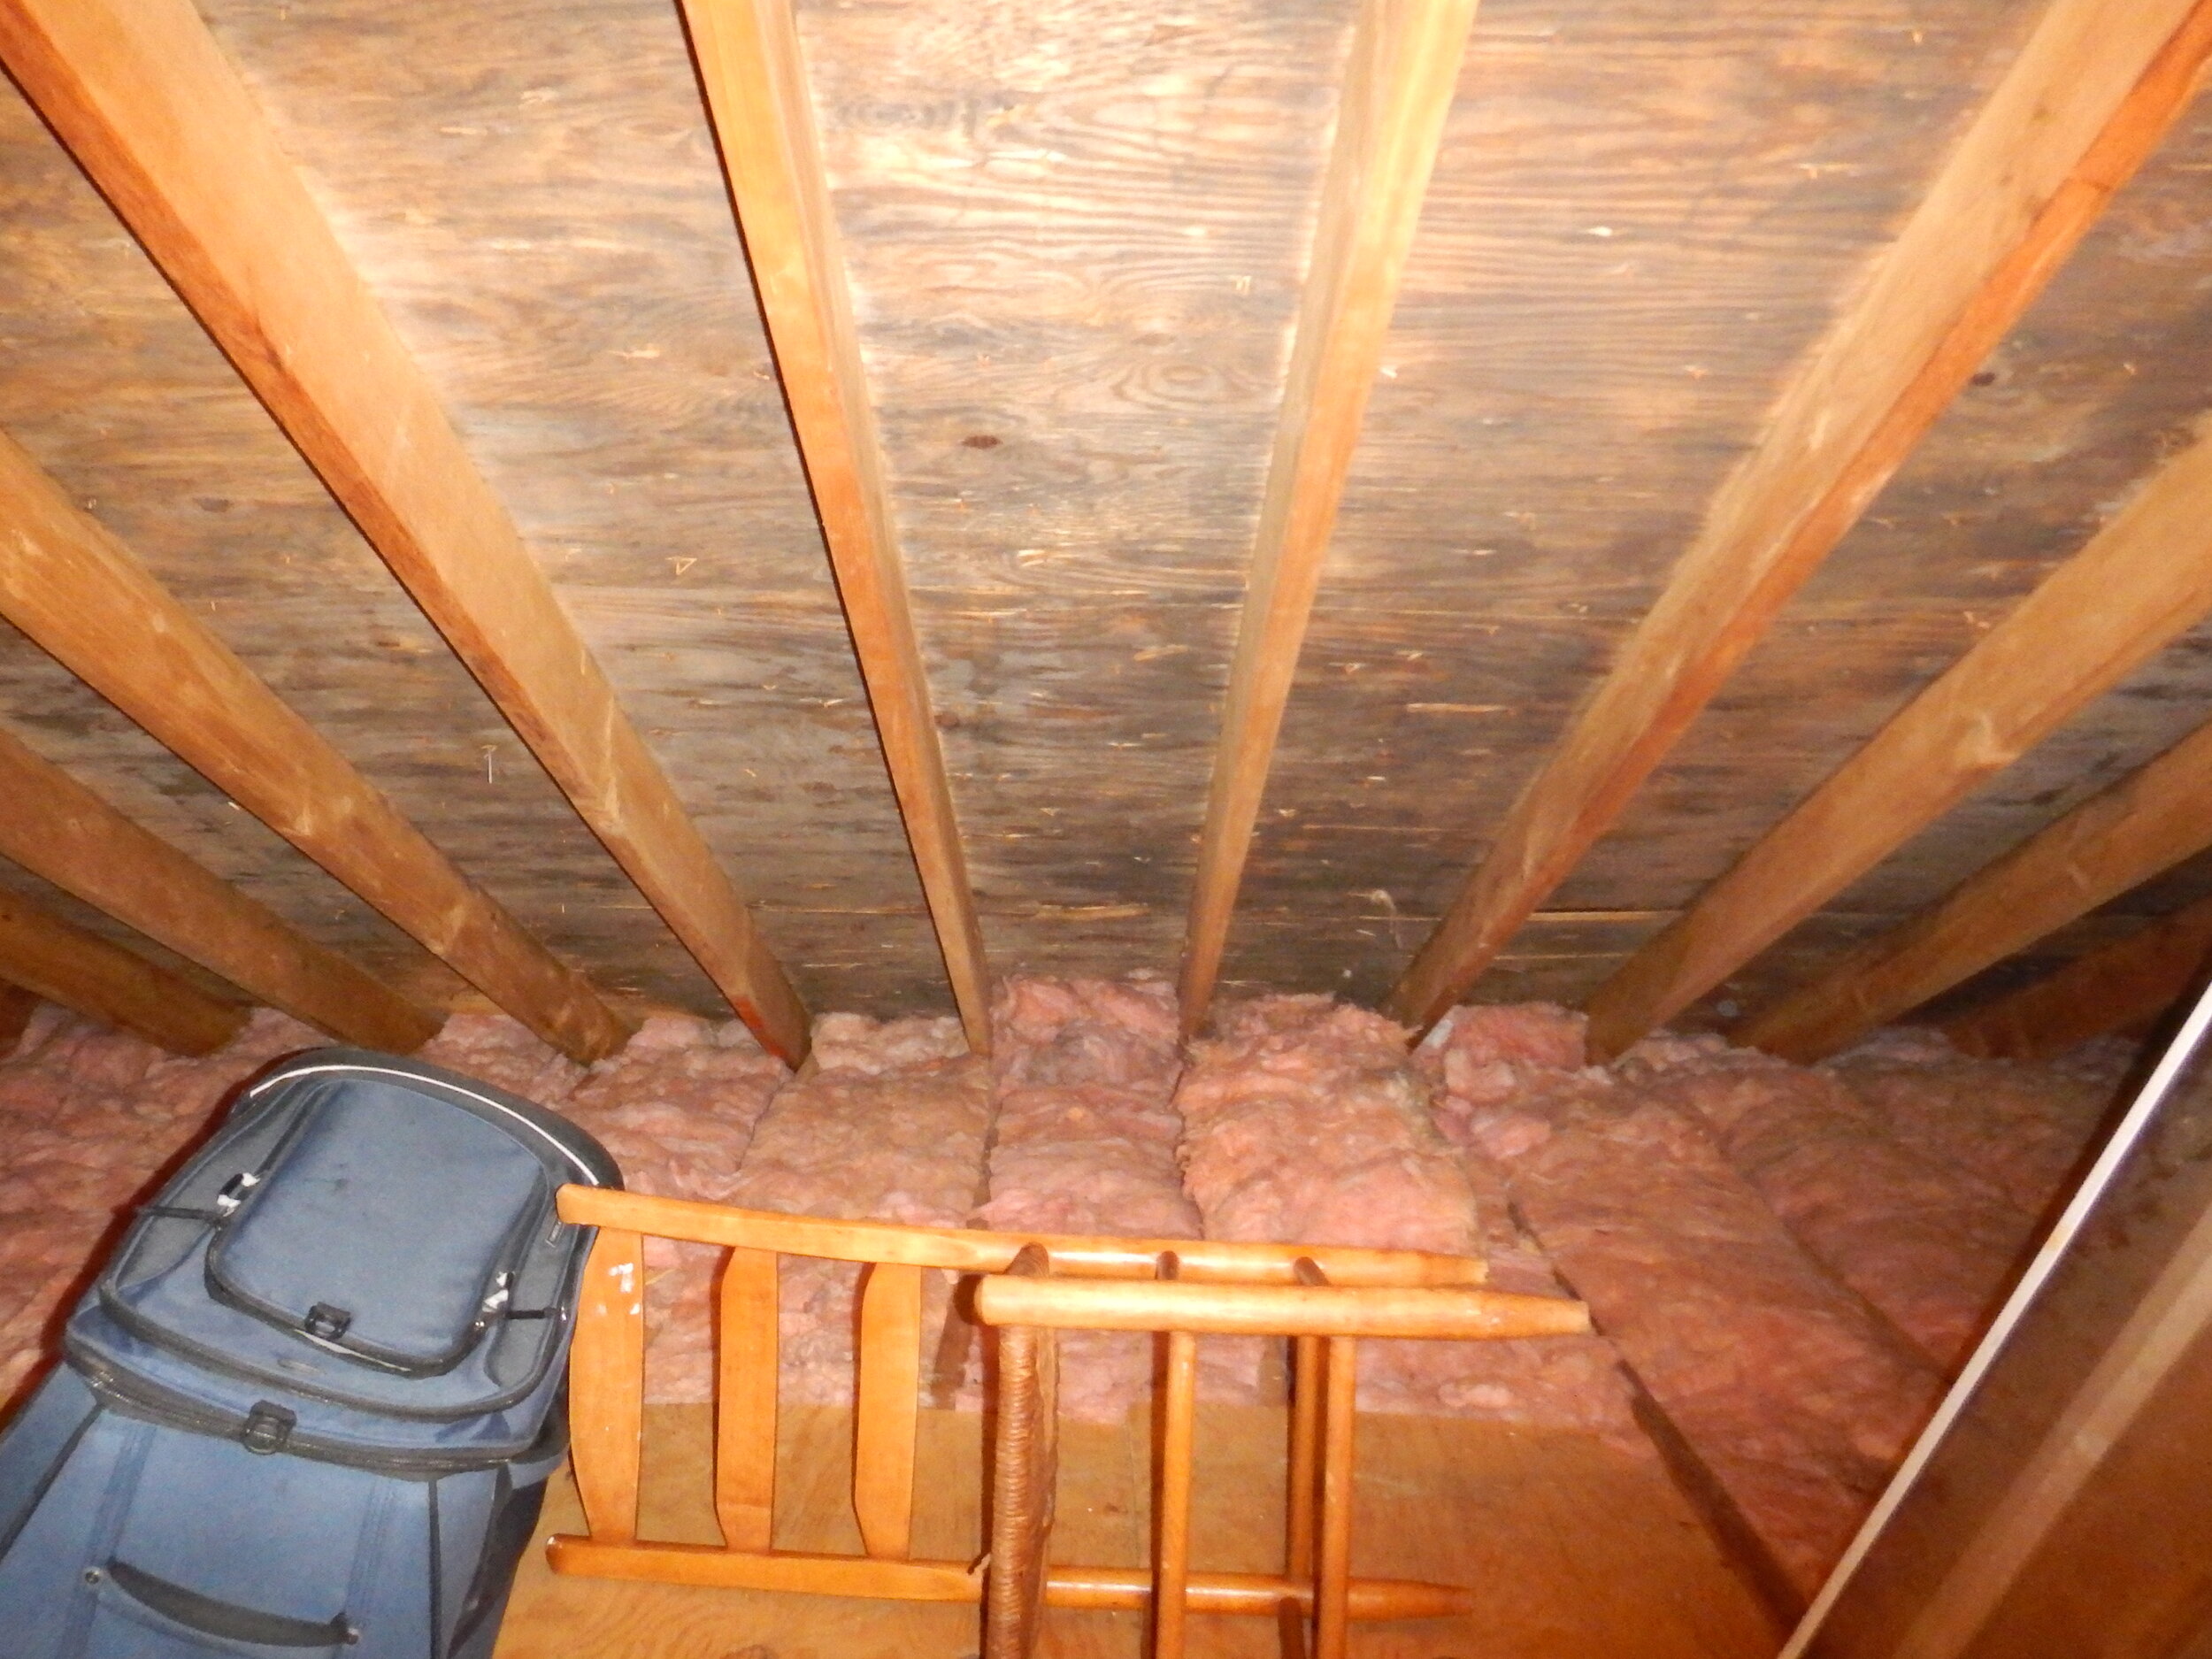 Condensation Problems in an Attic